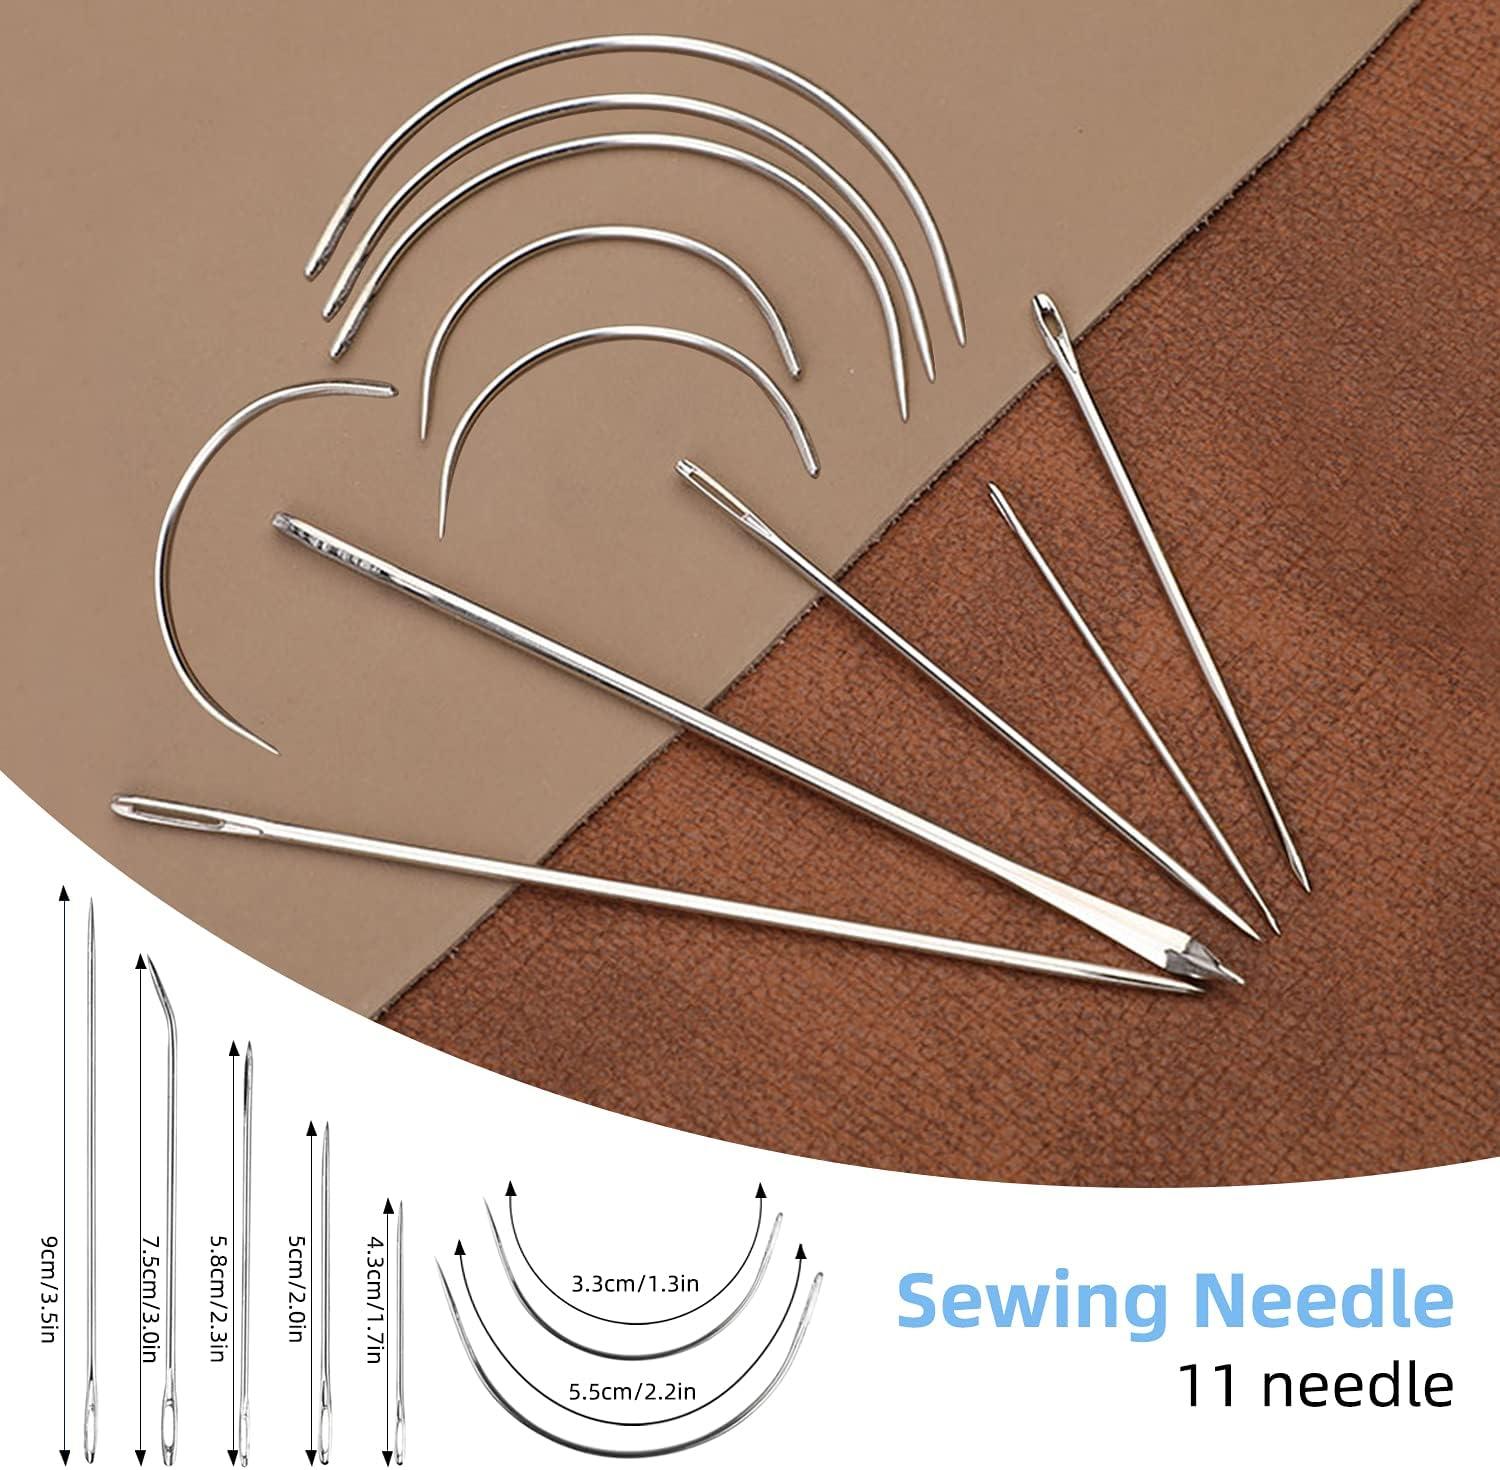 Leather sewing  Sewing leather, Thread size chart, Leather projects